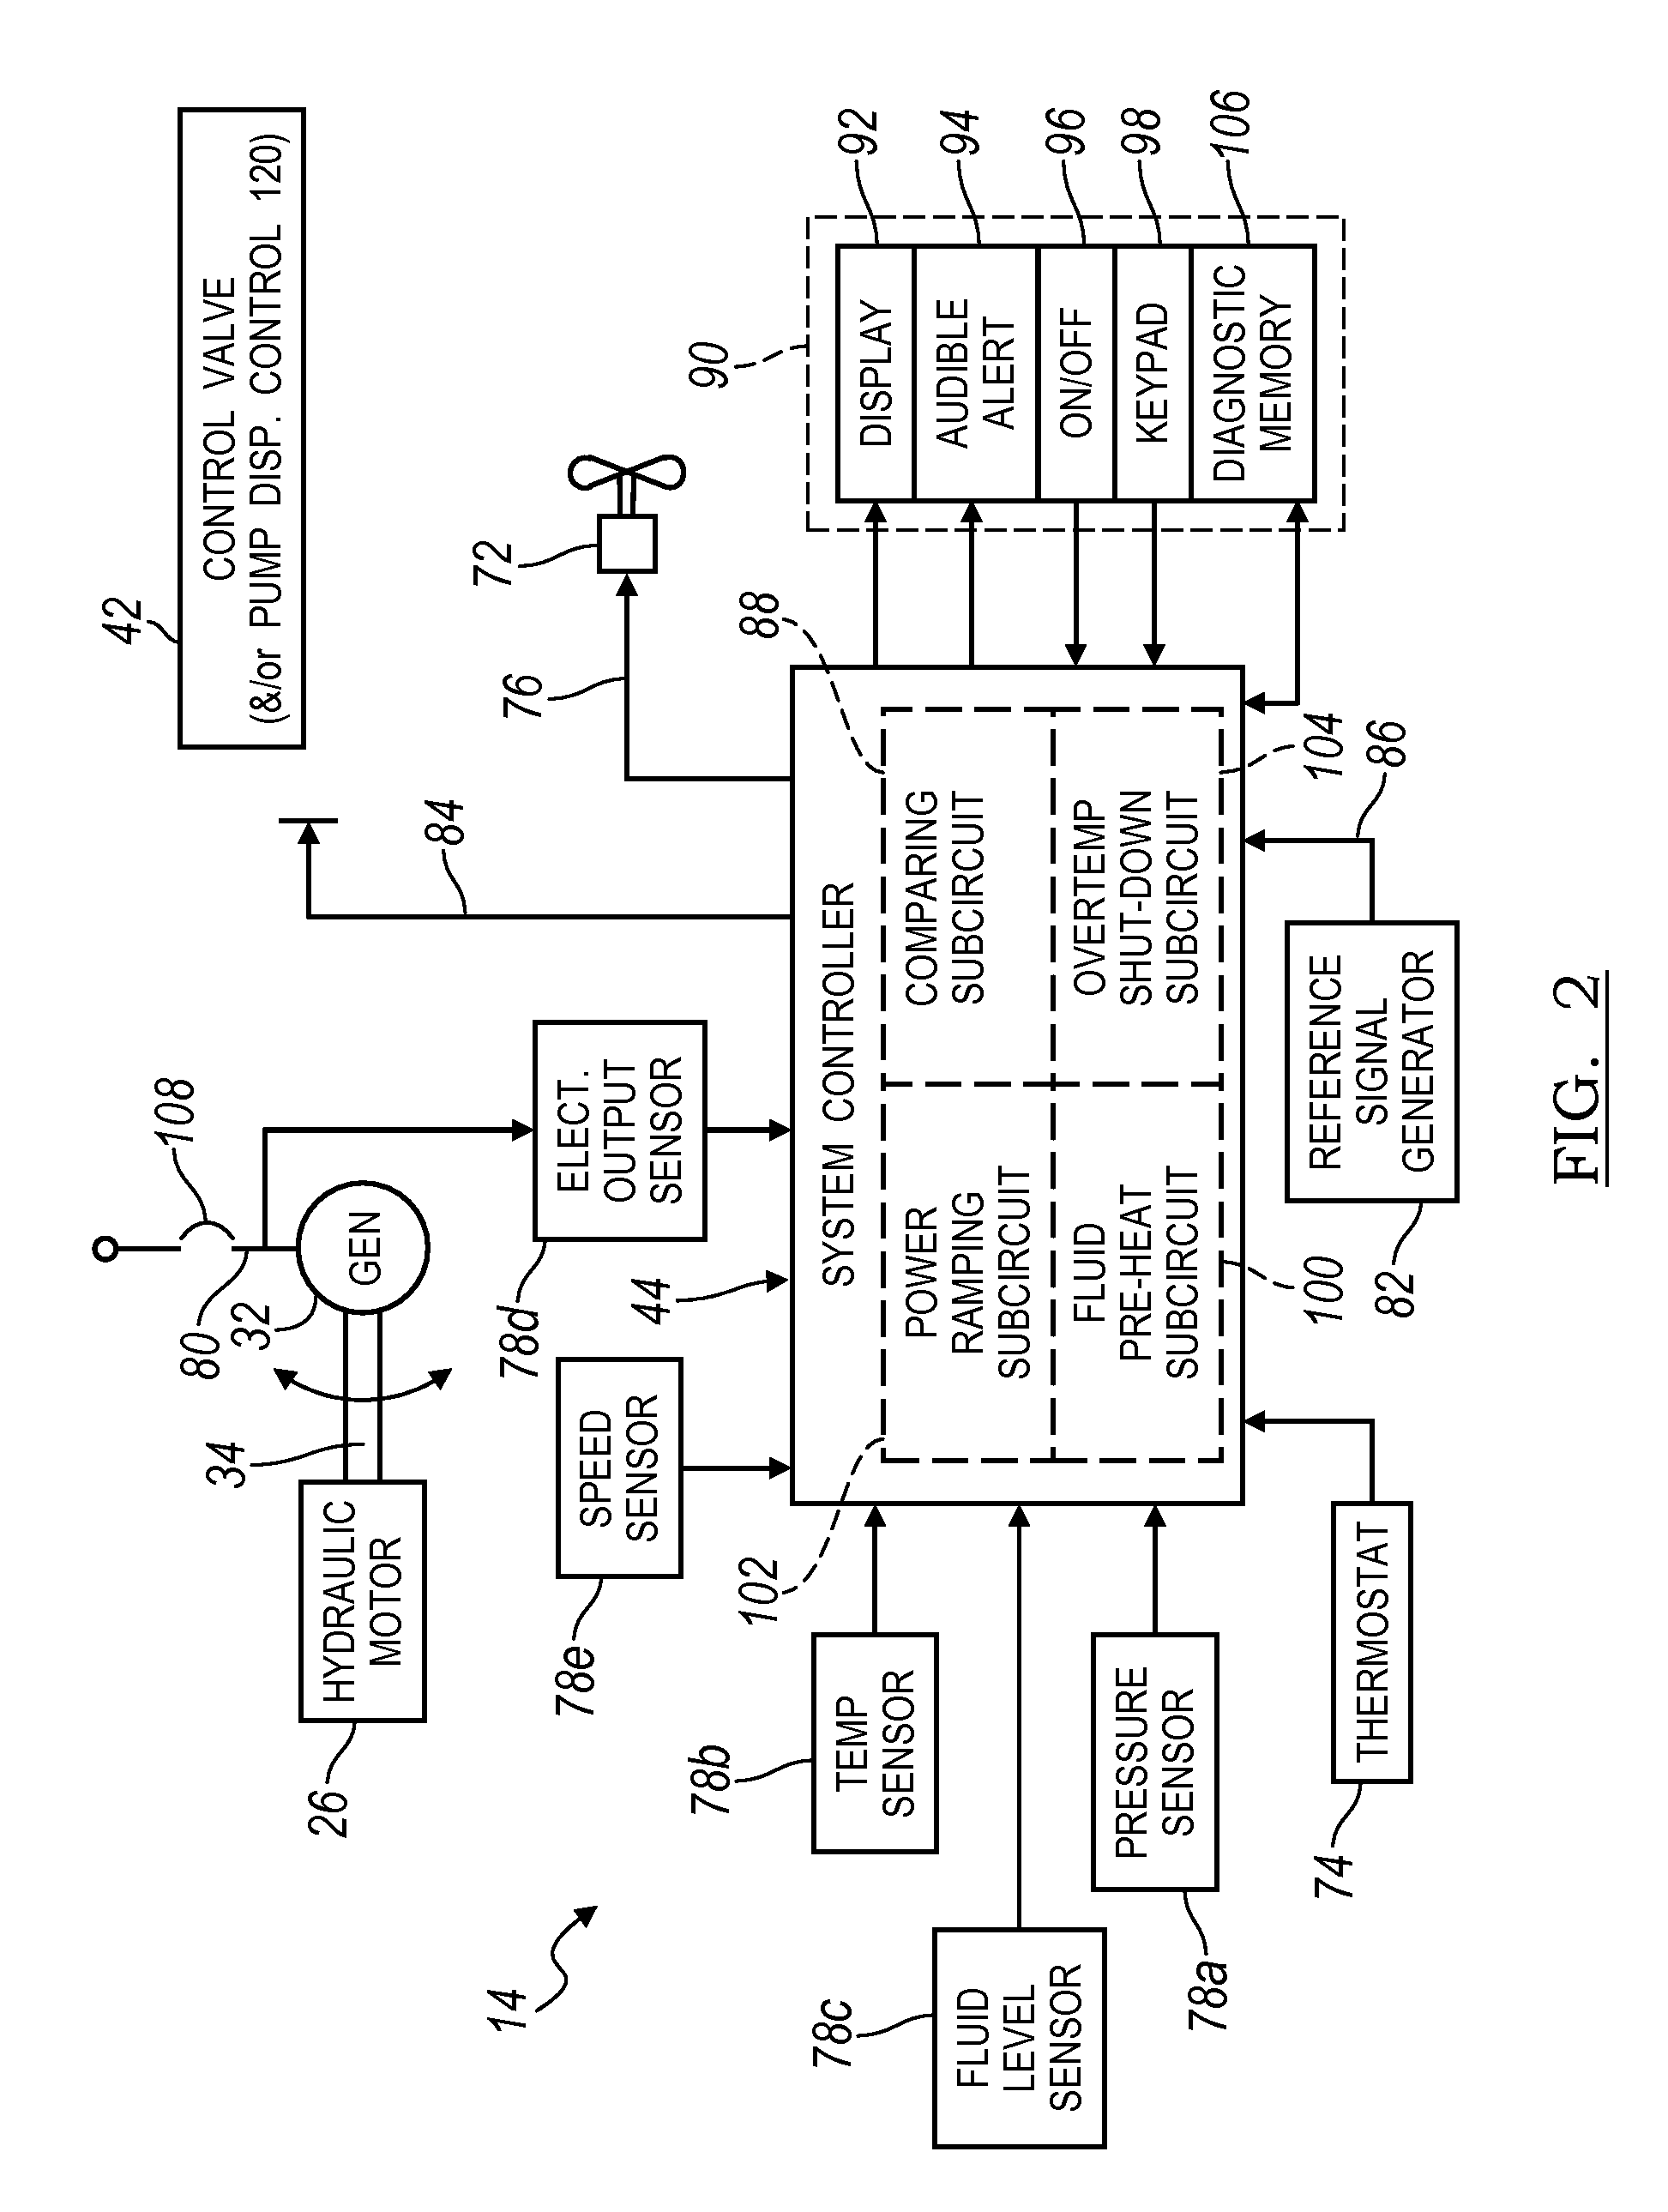 Electronic control for a hydraulically driven generator